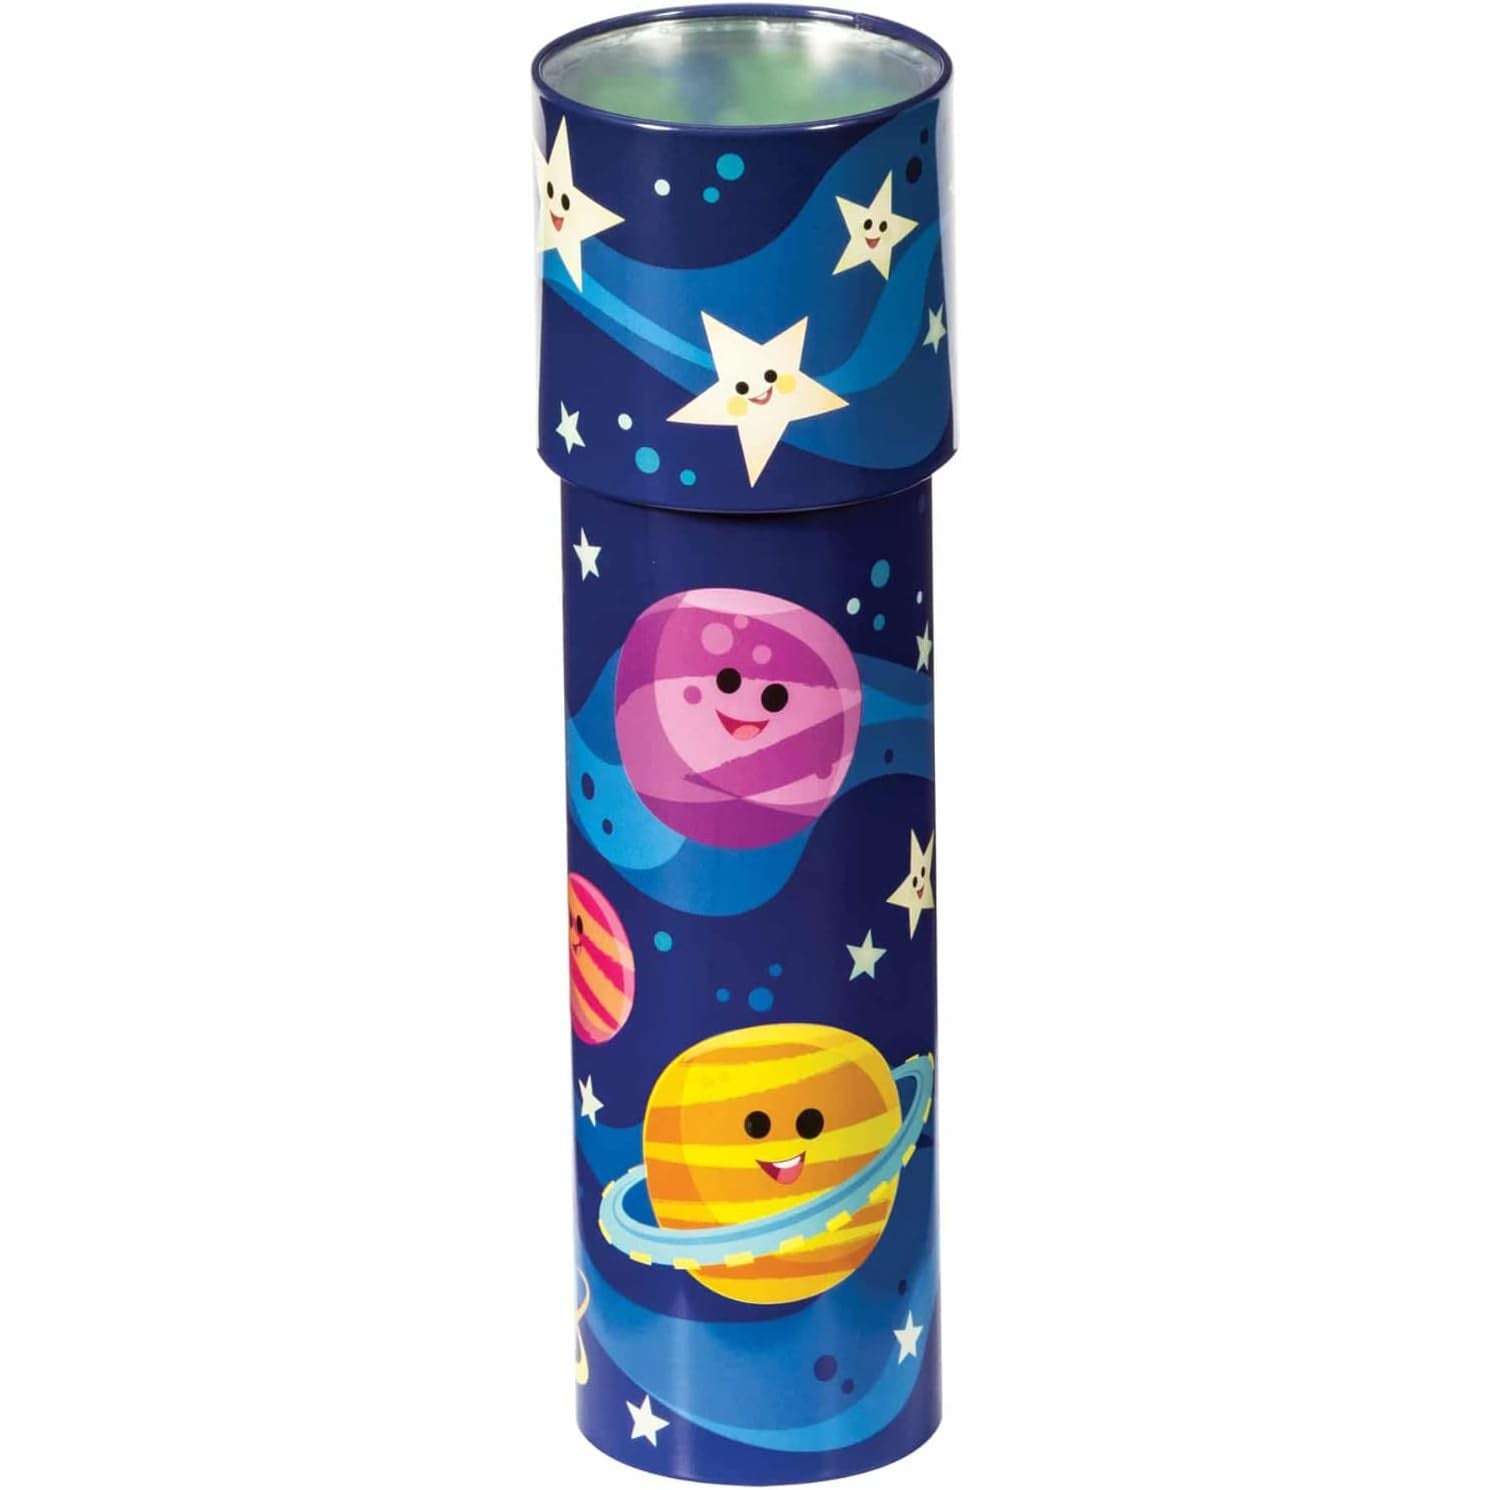 Front view of Lil' Classics Starlight Kaleidoscope.